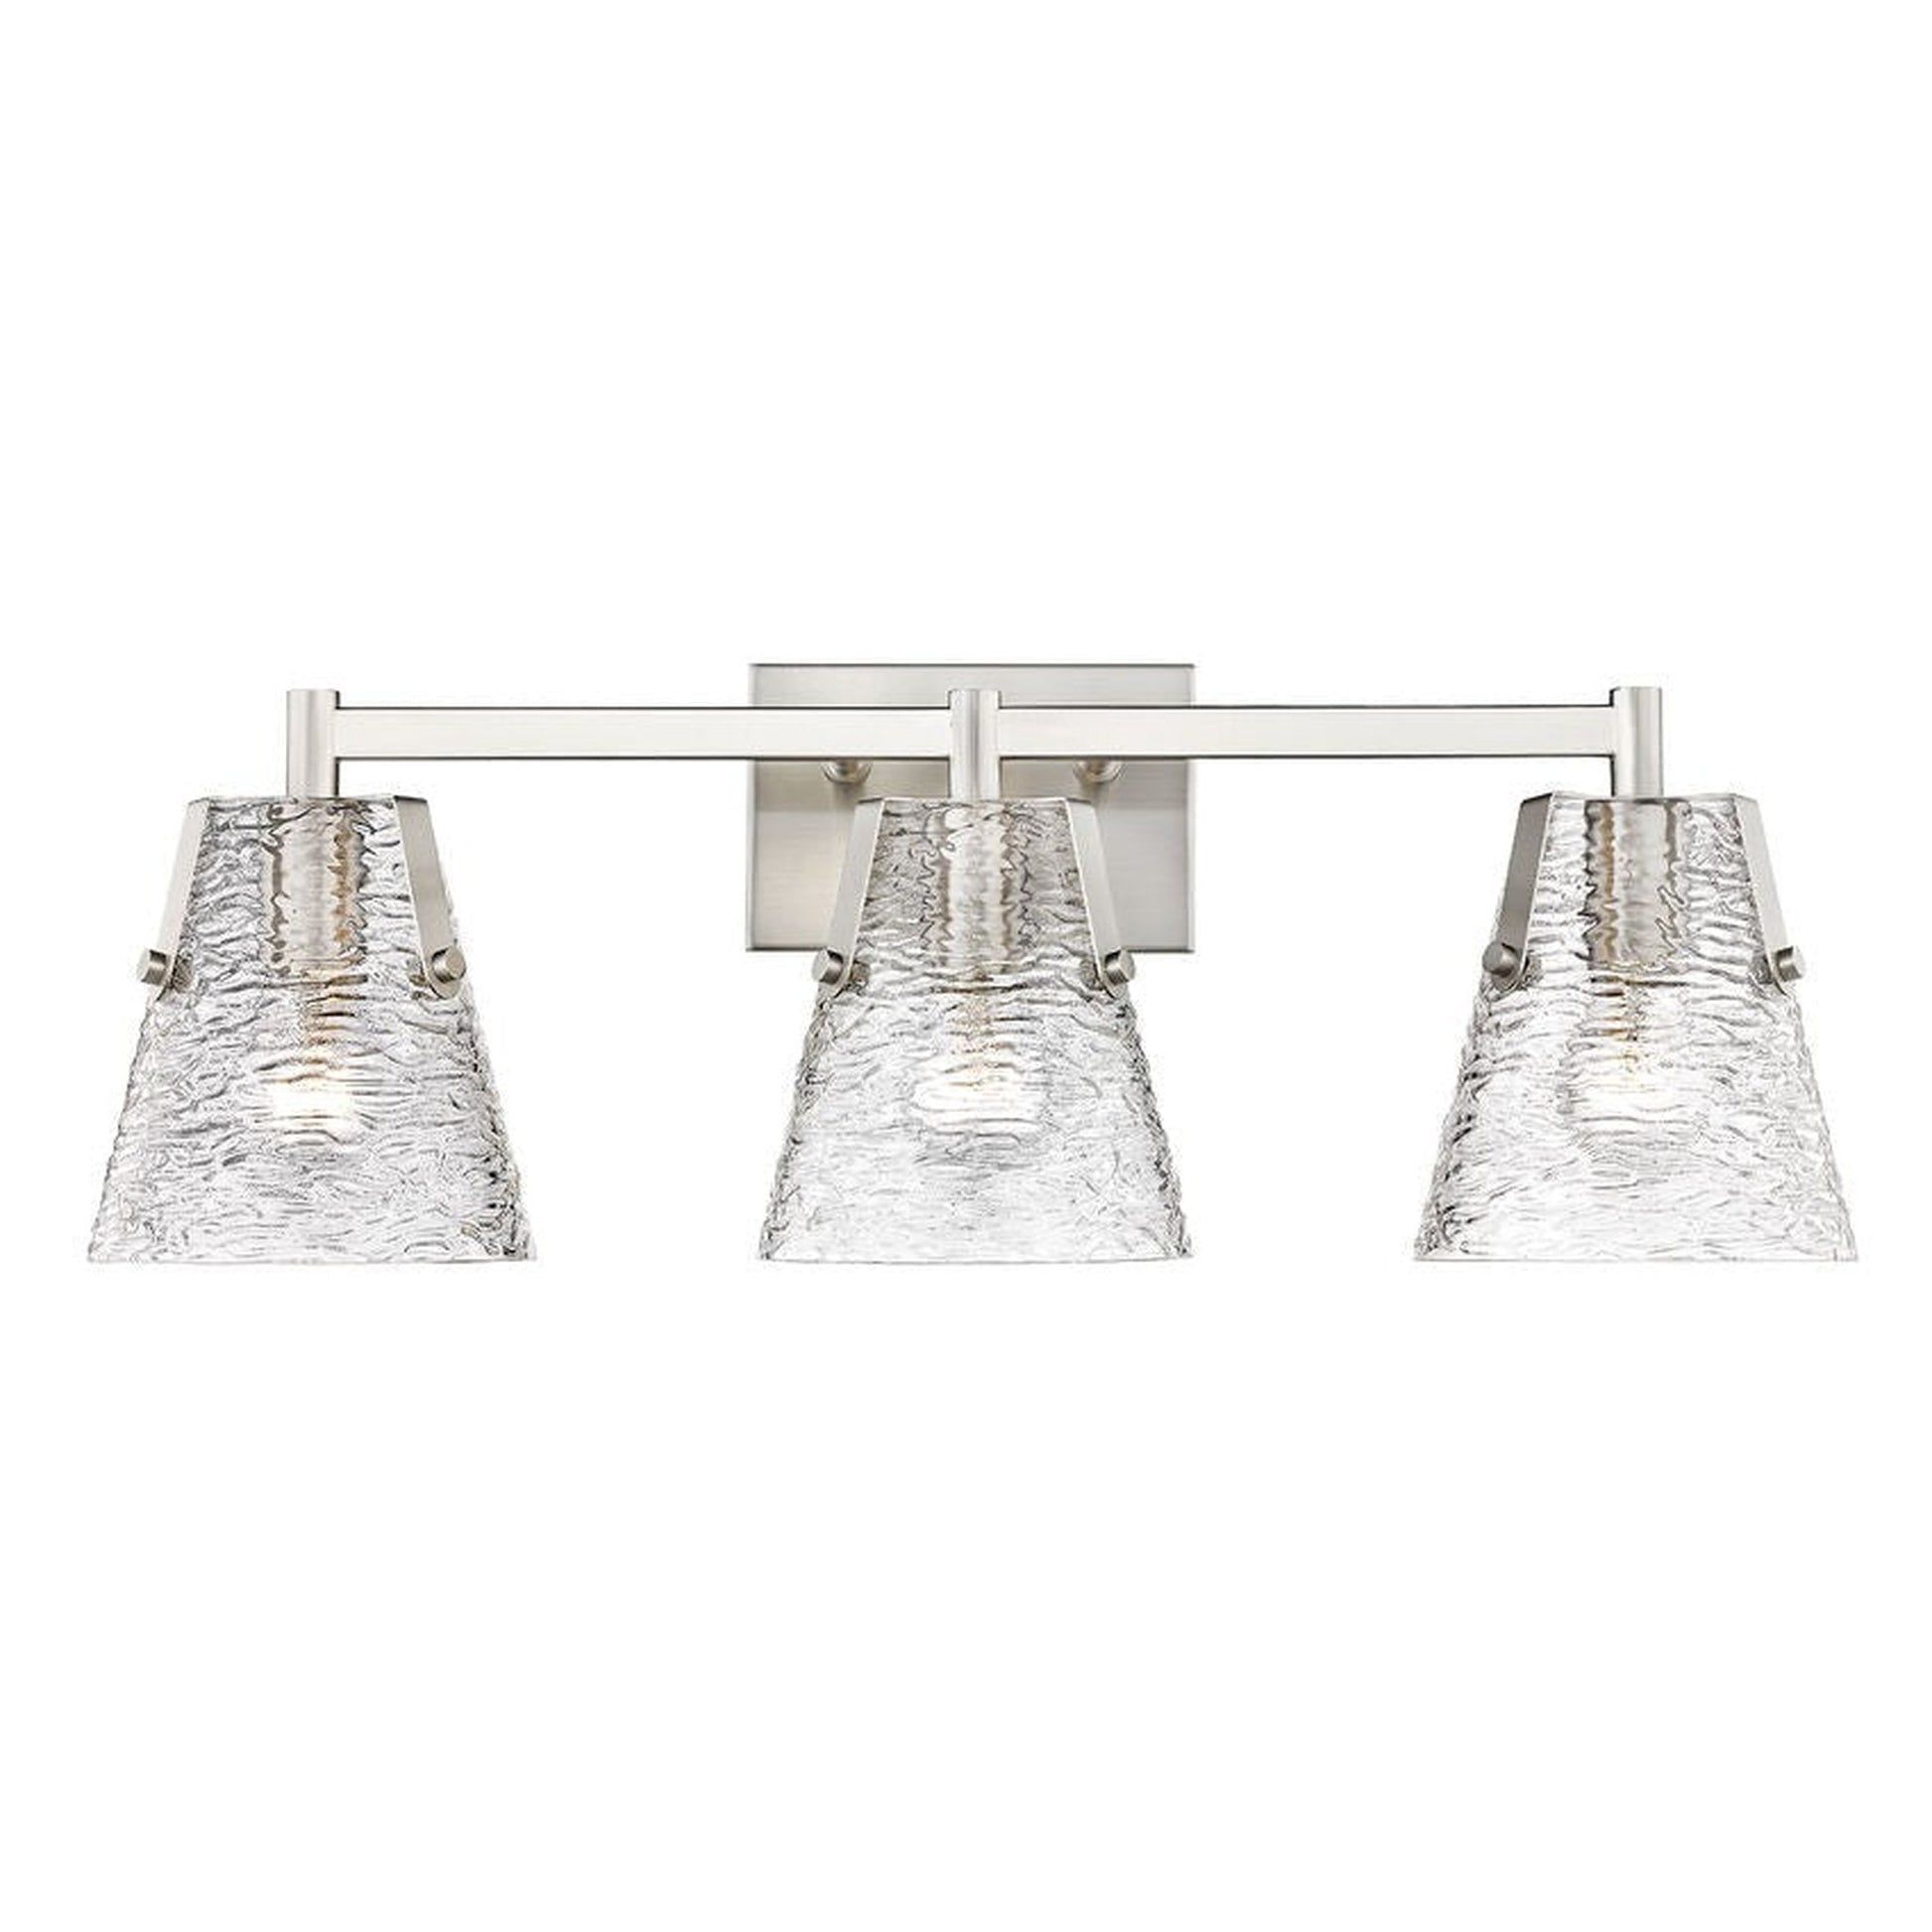 Z-Lite Analia 26" 3-Light Brushed Nickel and Clear Ribbed Glass Shade Vanity Light